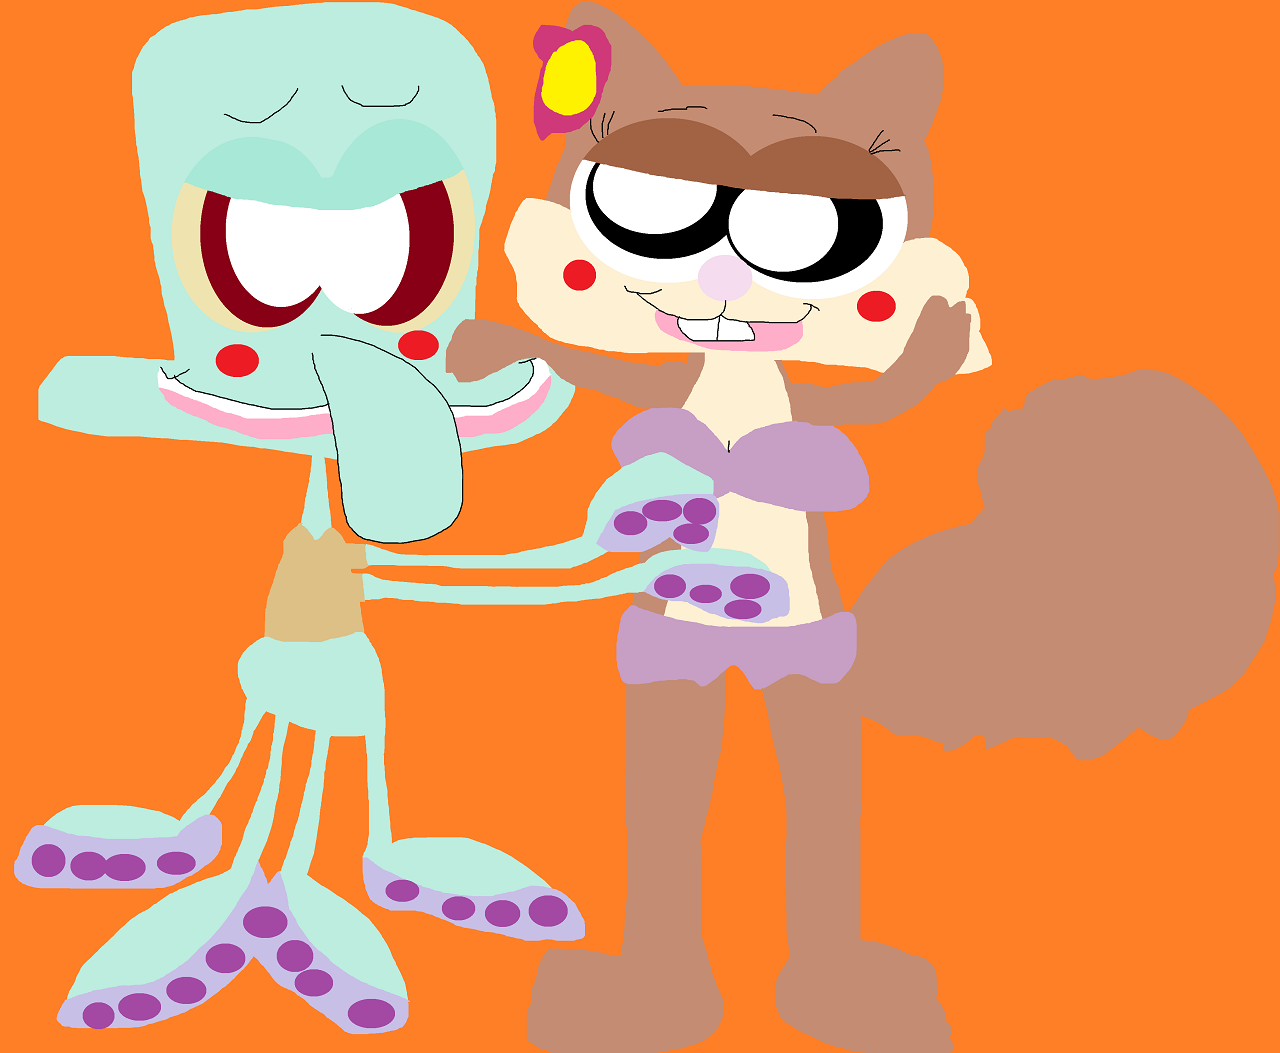 Squidward The Frisky Octopus And Sandy Again by Falconlobo